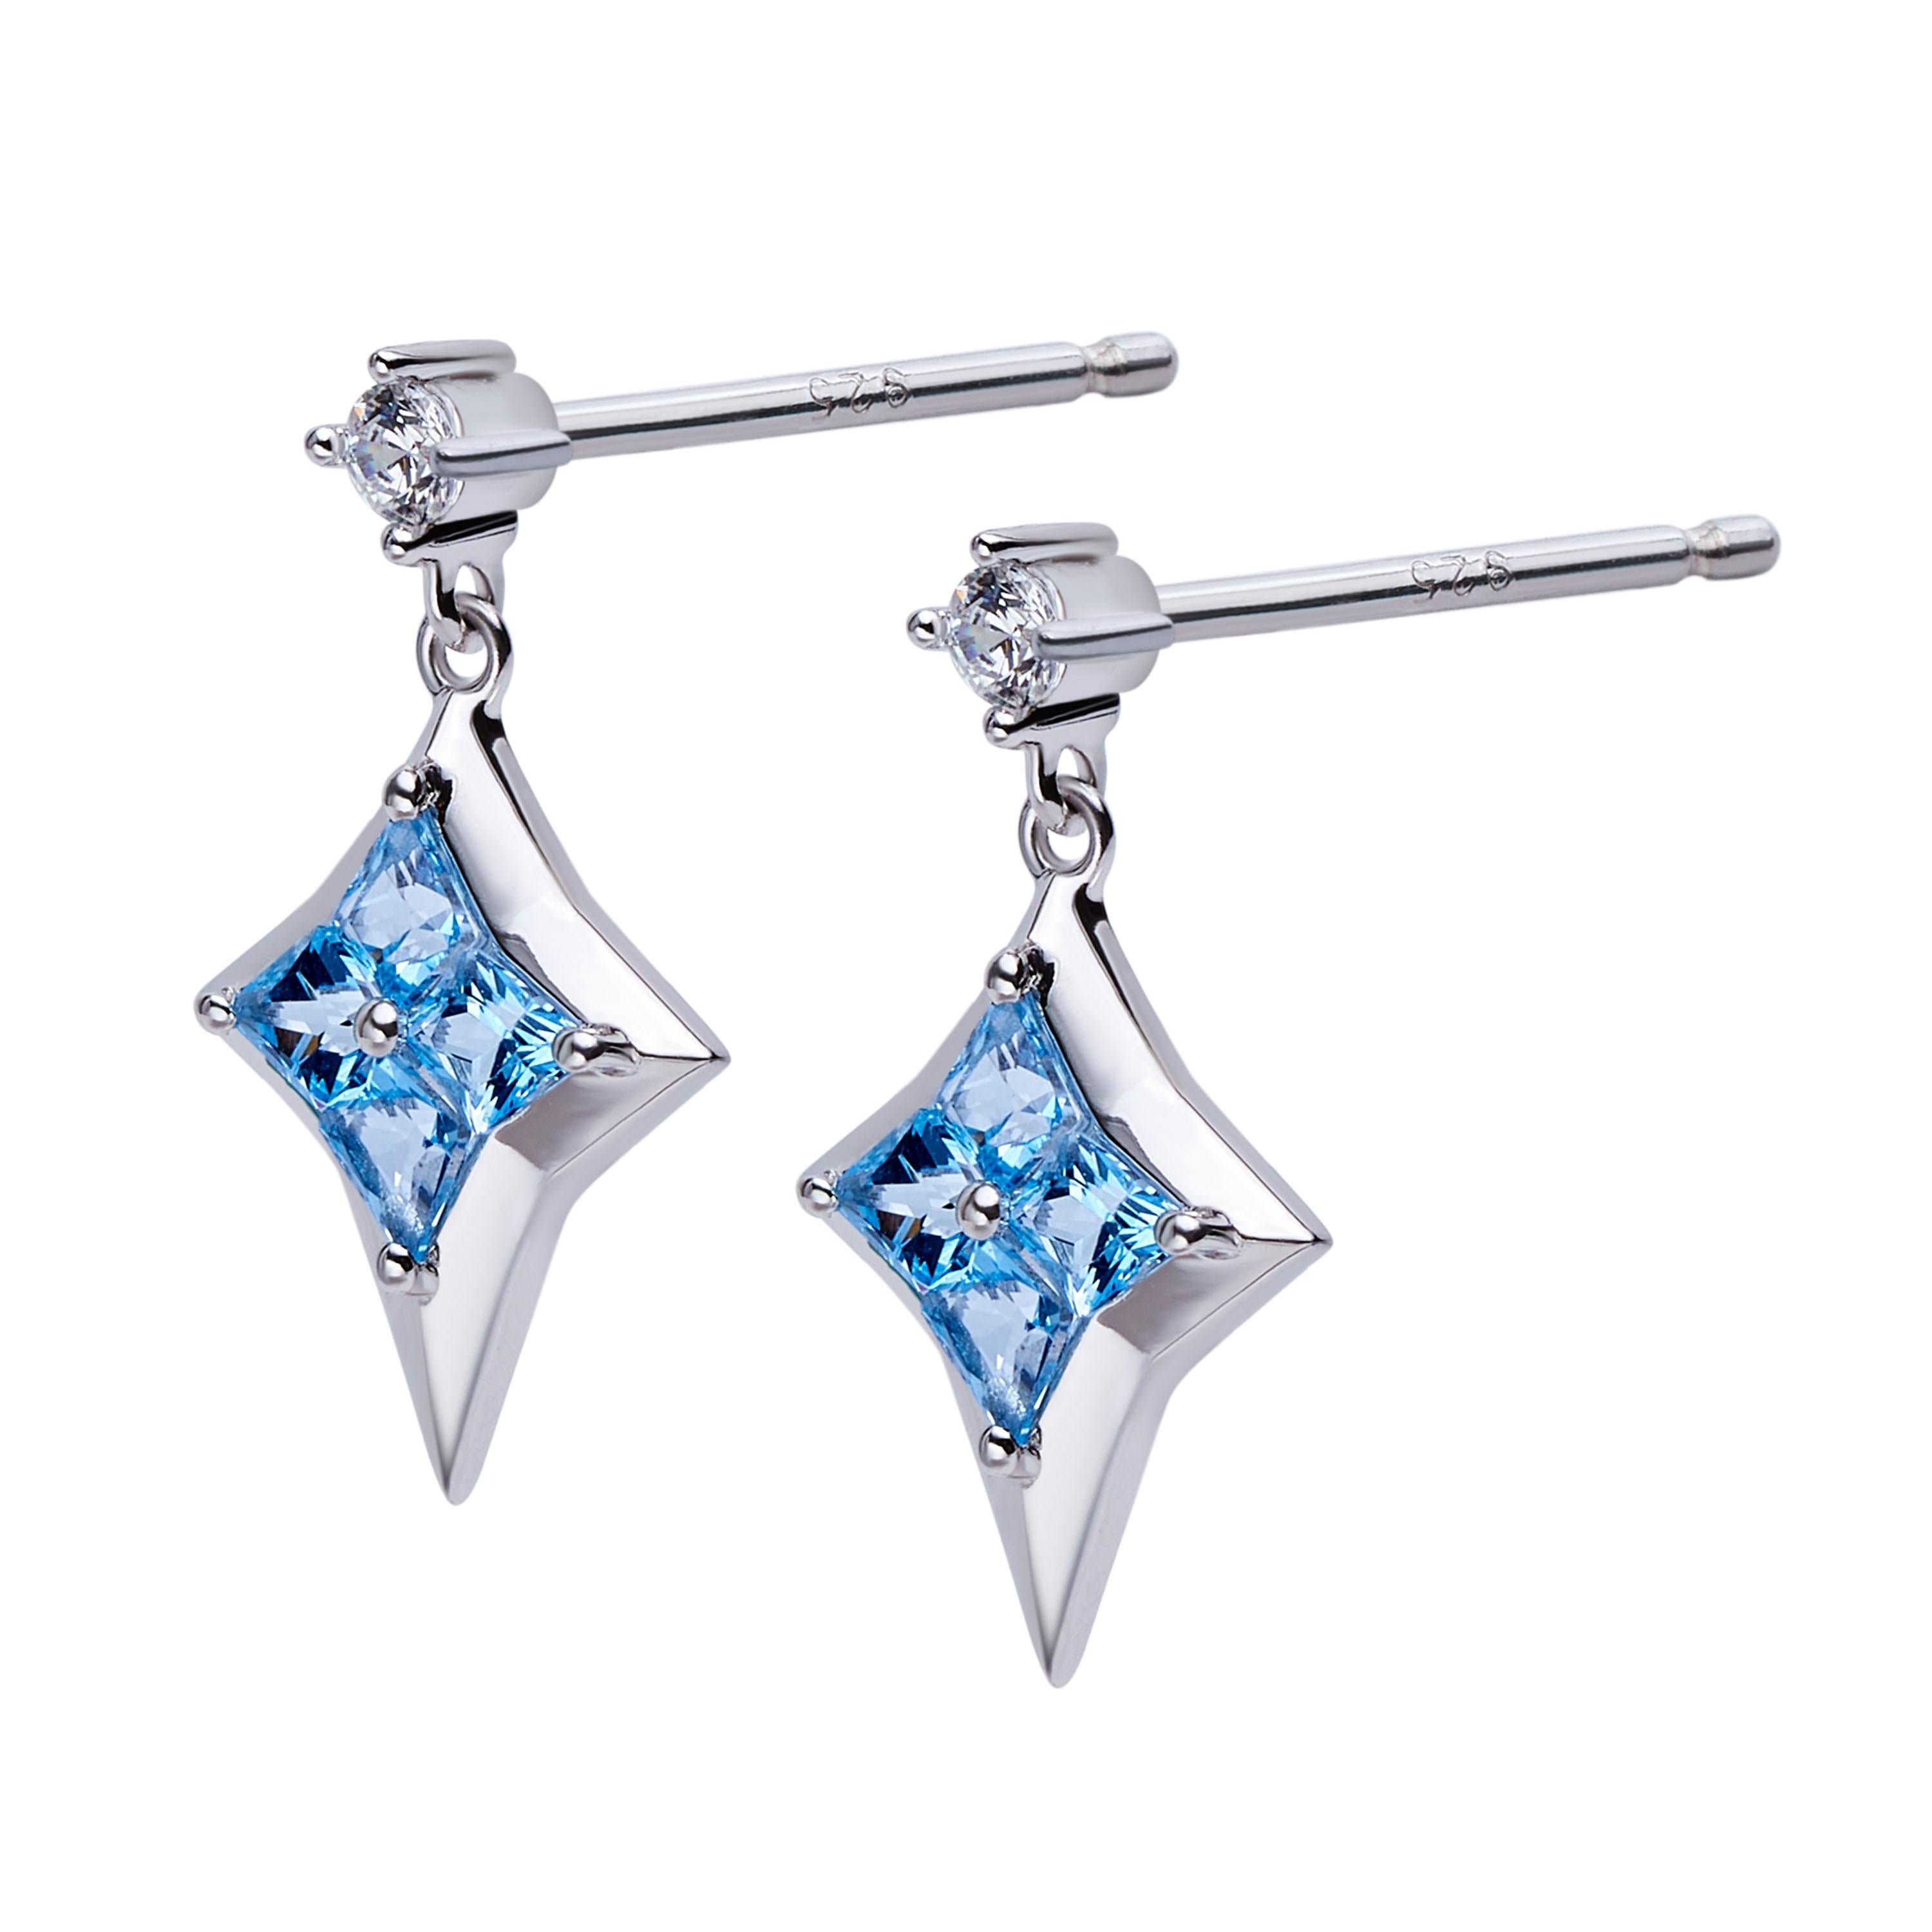 Description:
Star of Love North Star drop earrings with 0.6ct blue topazes and white cubic zirconia, set in white rhodium plate on sterling silver.

Inspiration:
The Star of Love series is inspired by the Polaris – the brightest star of the